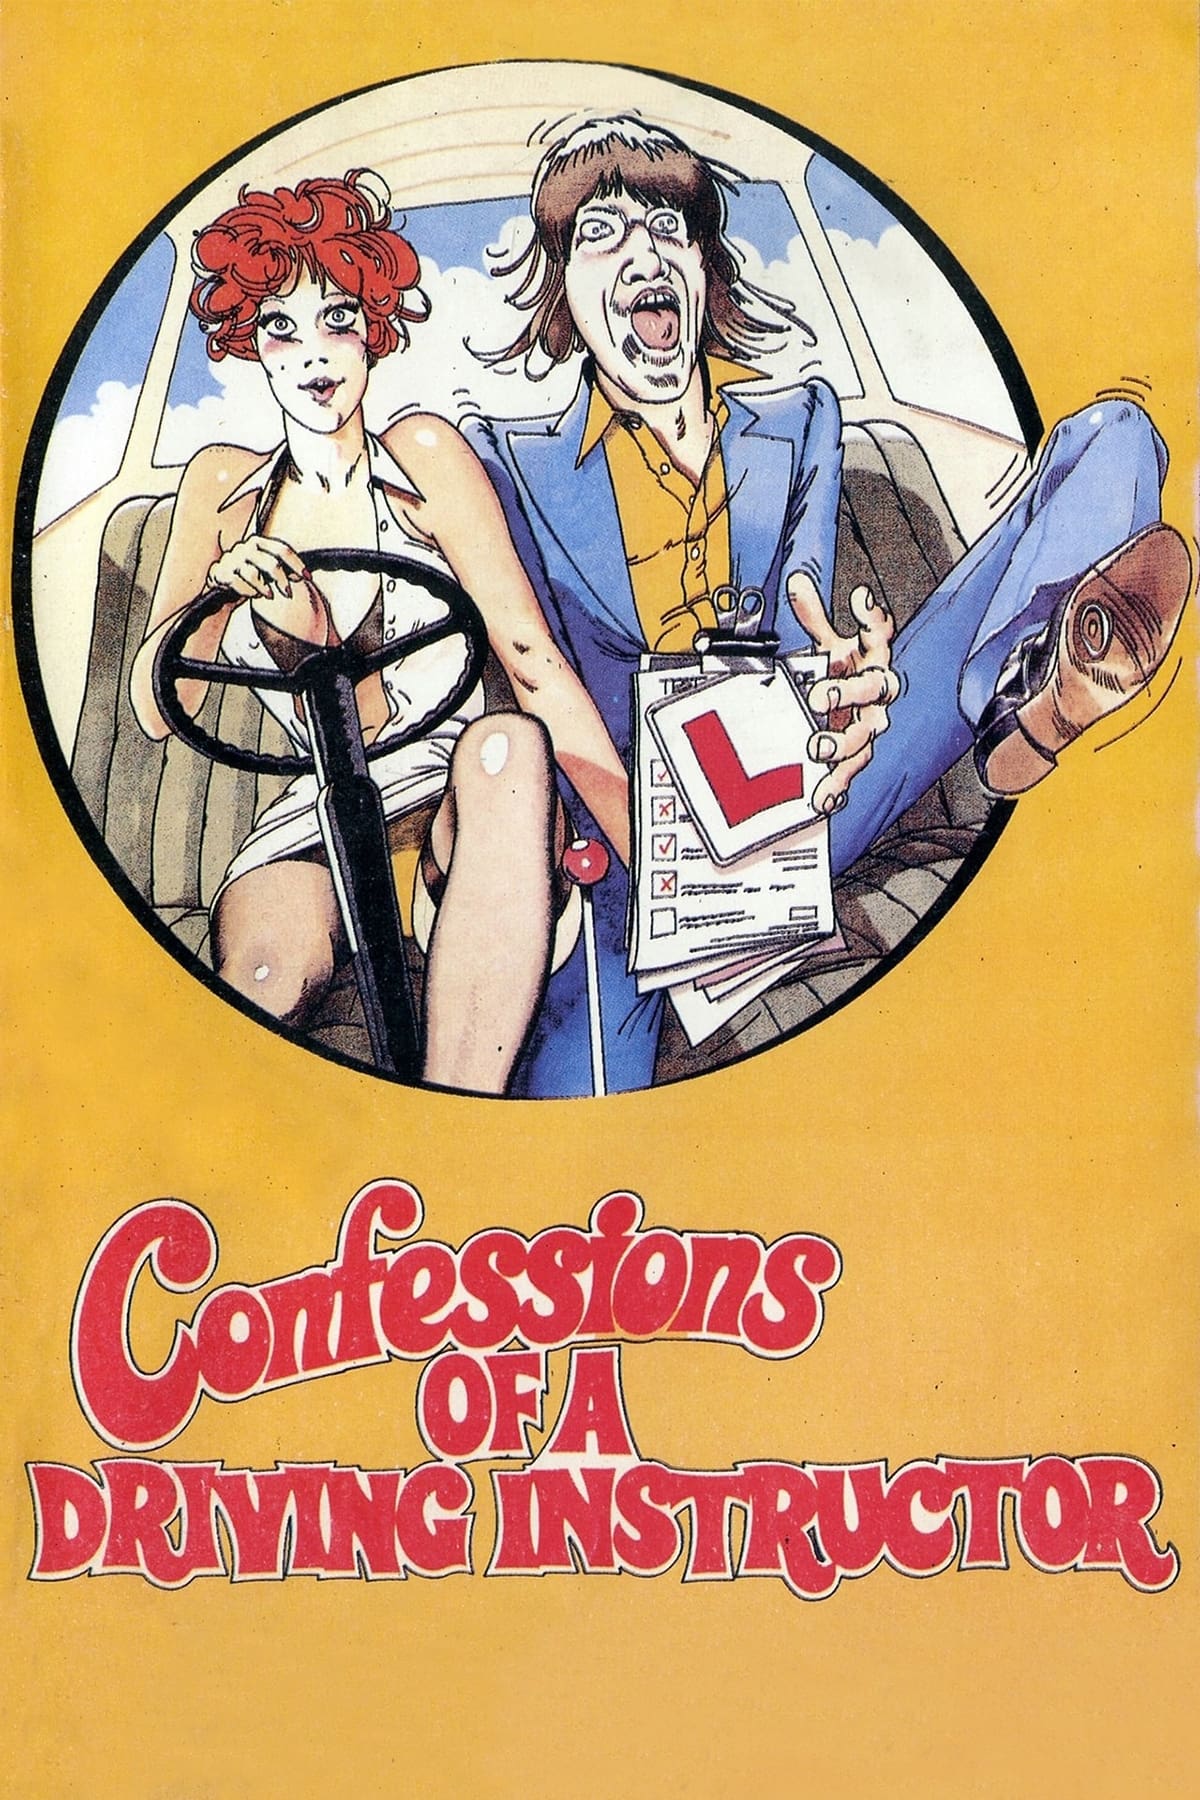 Confessions of a Driving Instructor (1976)